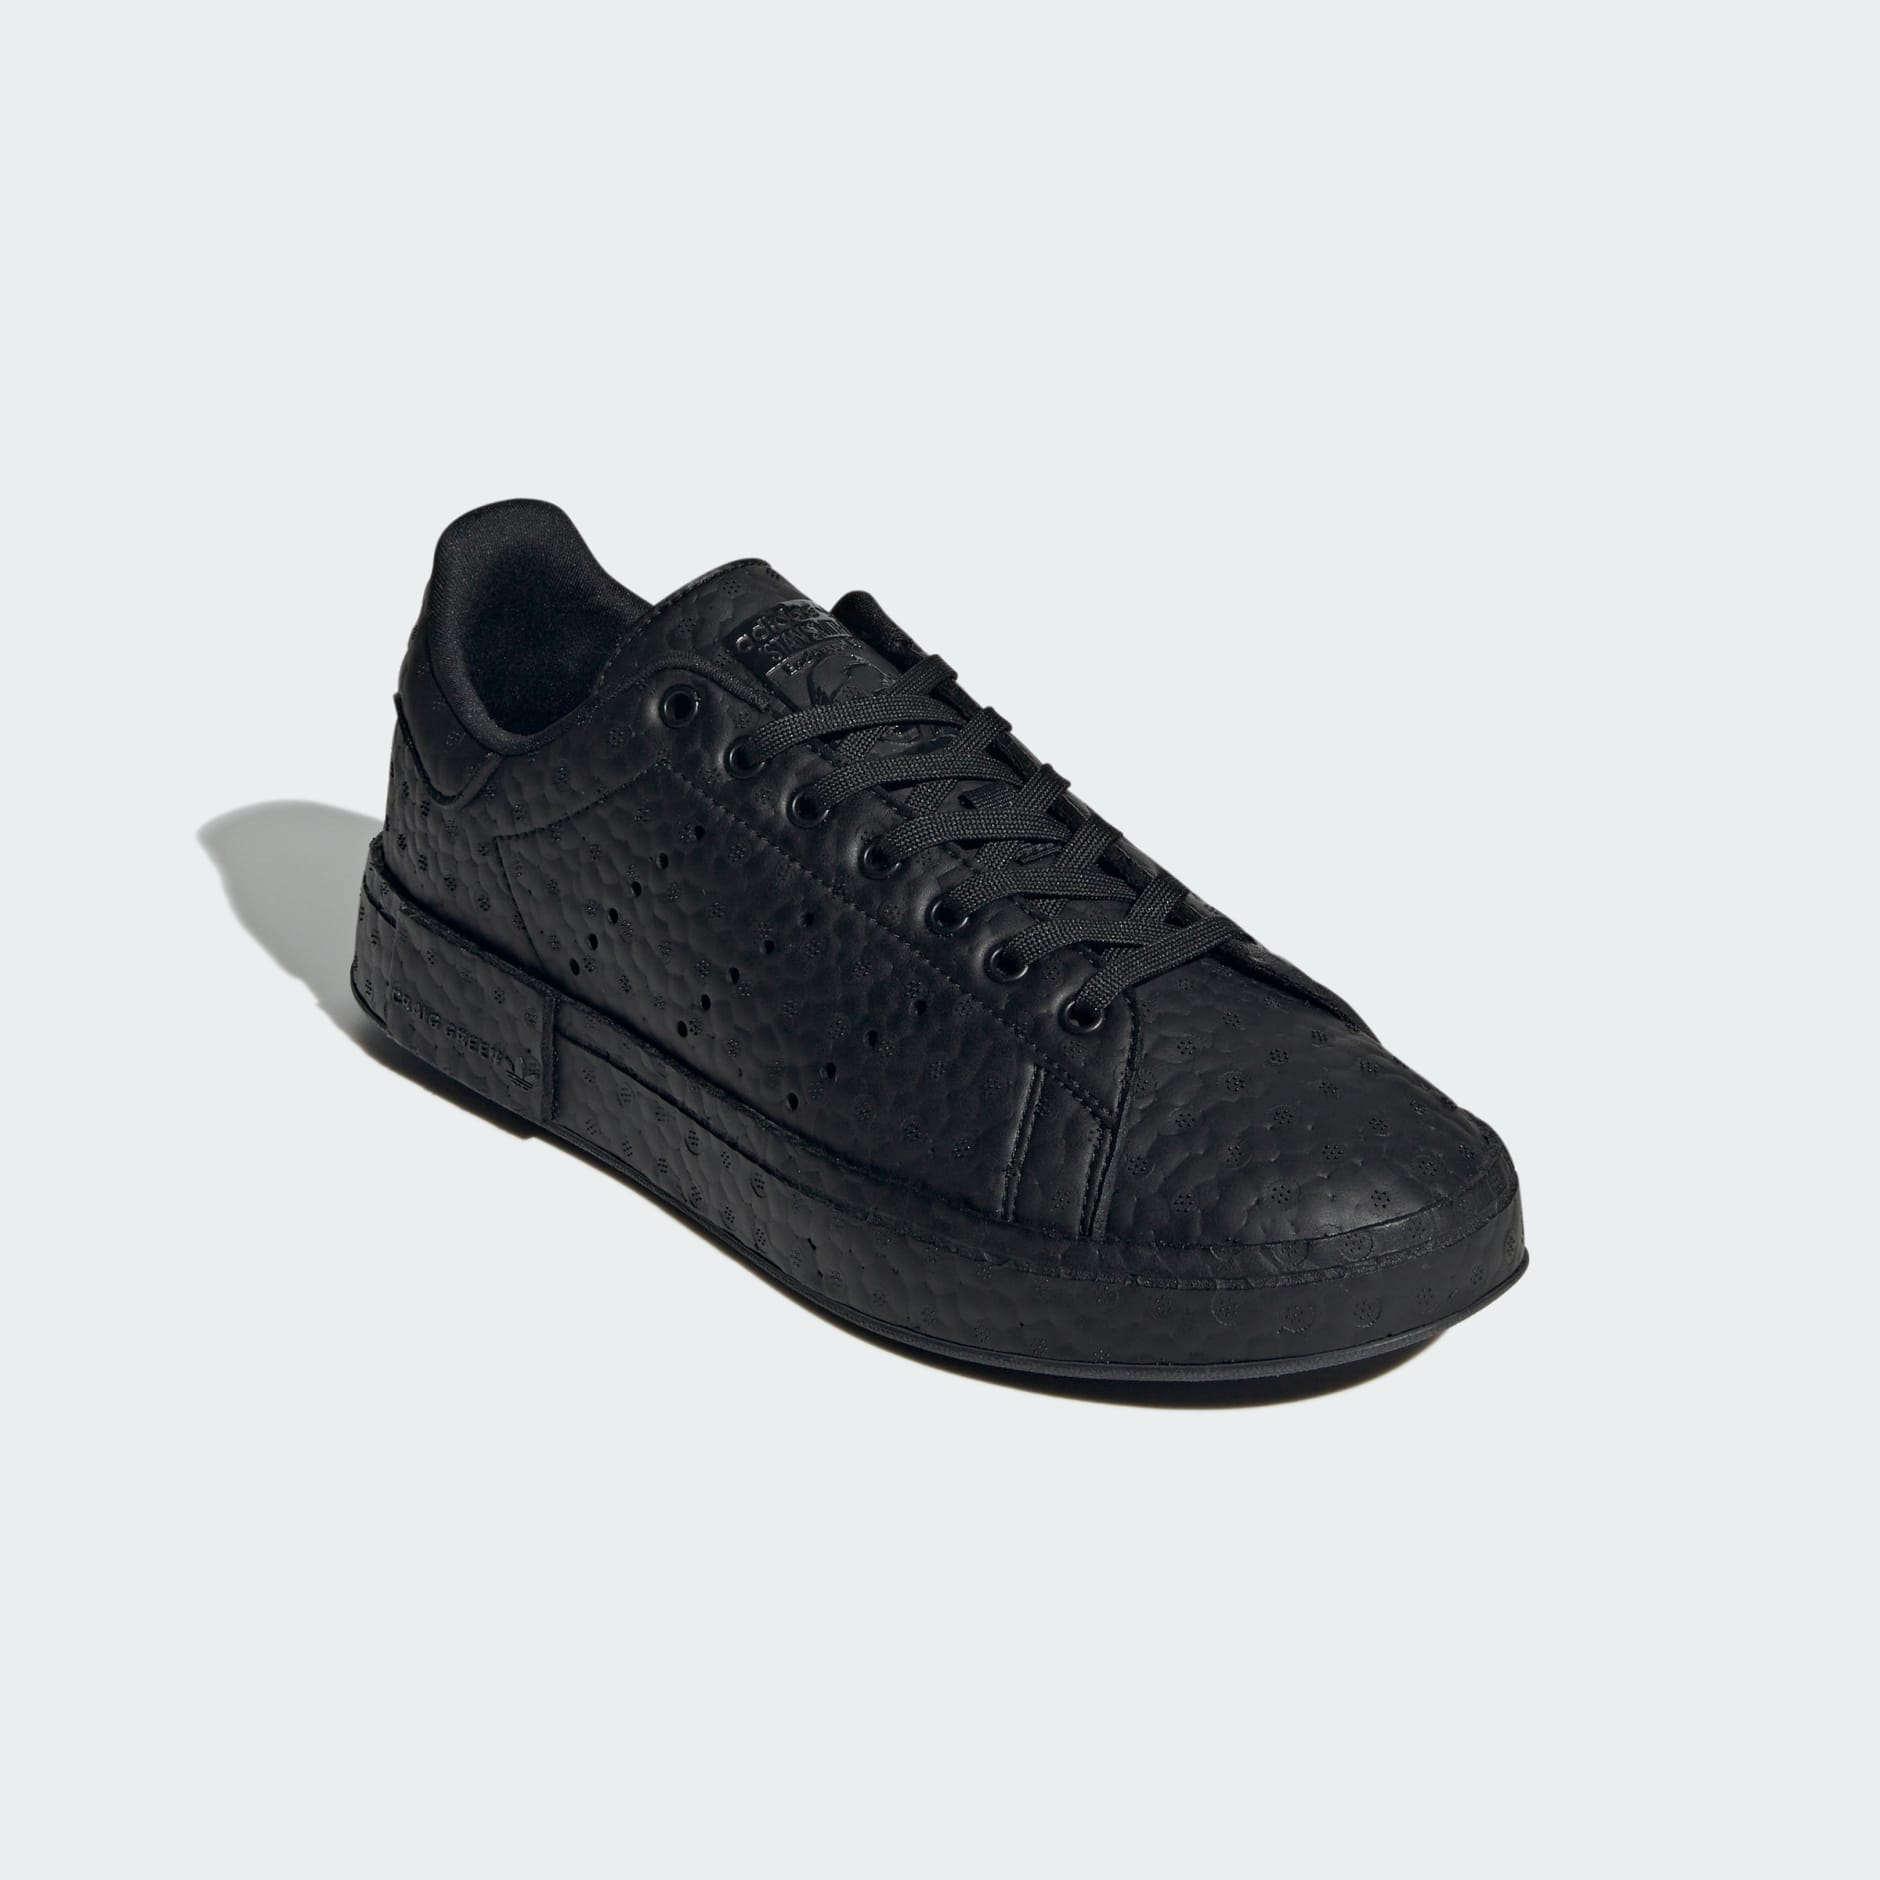 Shoes - Craig Green Stan Smith BOOST Low Trainers - Black | adidas ...